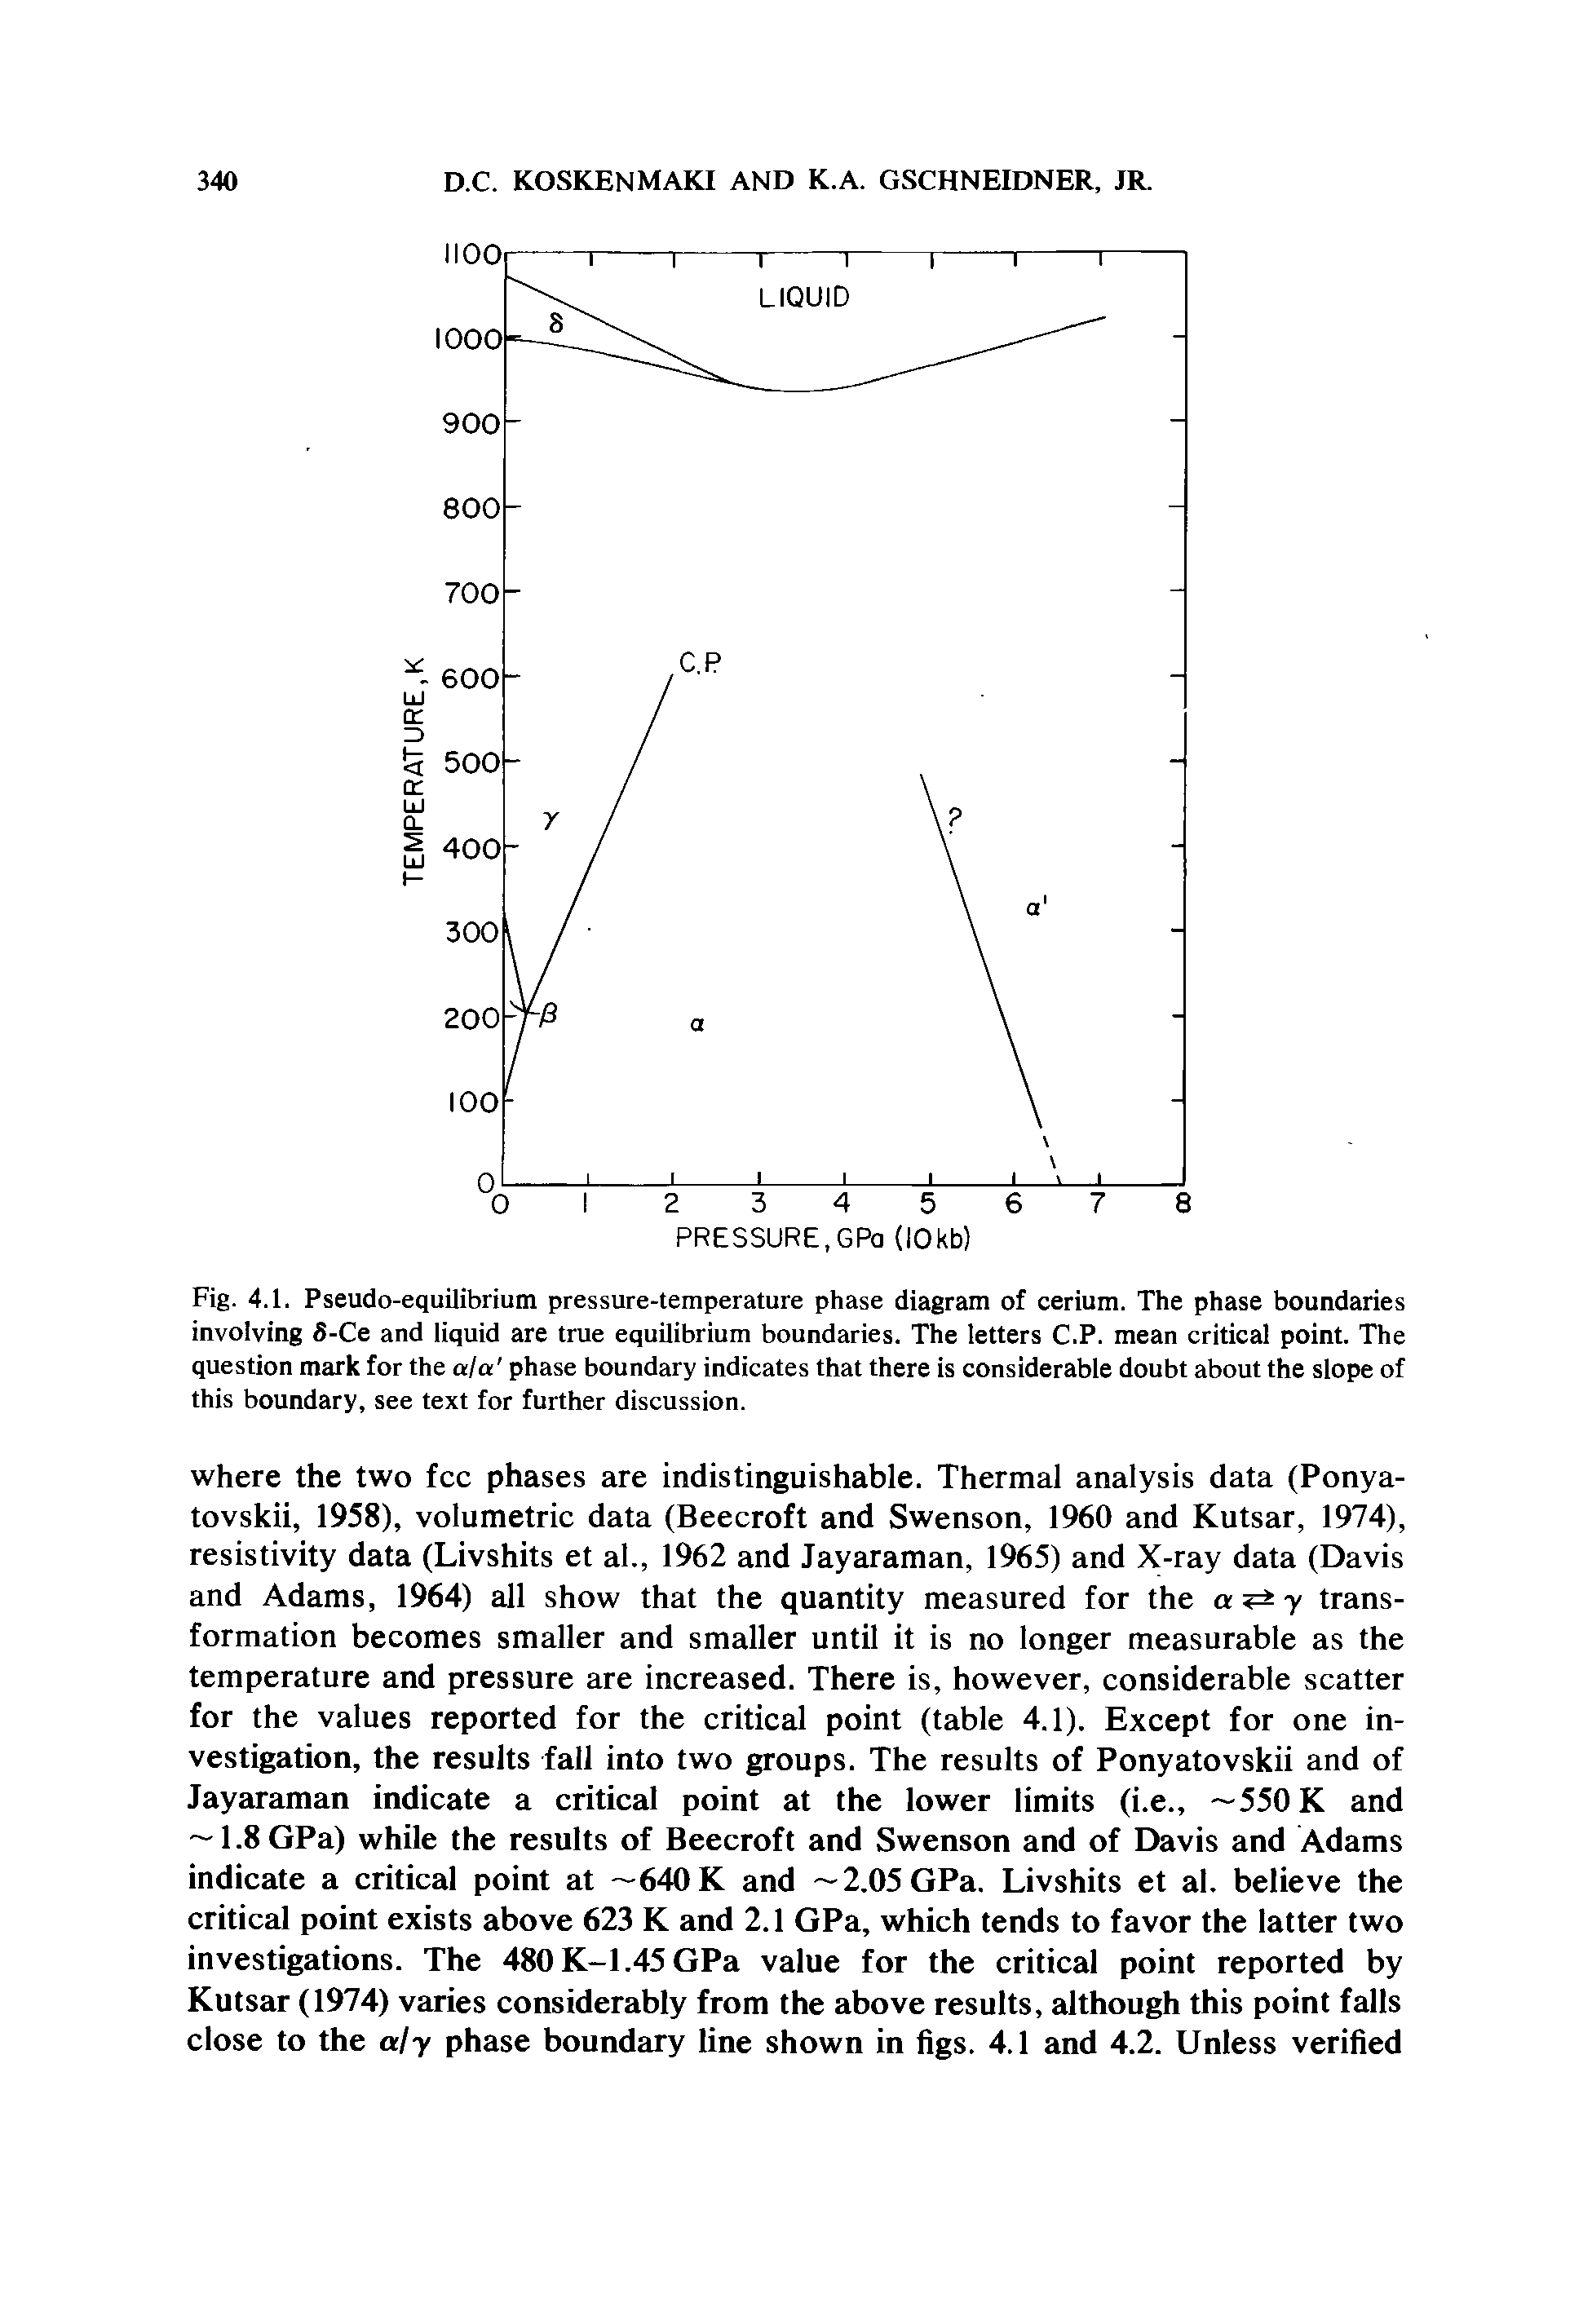 Fig. 4.1. Pseudo-equilibrium pressure-temperature phase diagram of cerium. The phase boundaries involving 5-Ce and liquid are true equilibrium boundaries. The letters C.P. mean critical point. The question mark for the ala phase boundary indicates that there is considerable doubt about the slope of this boundary, see text for further discussion.